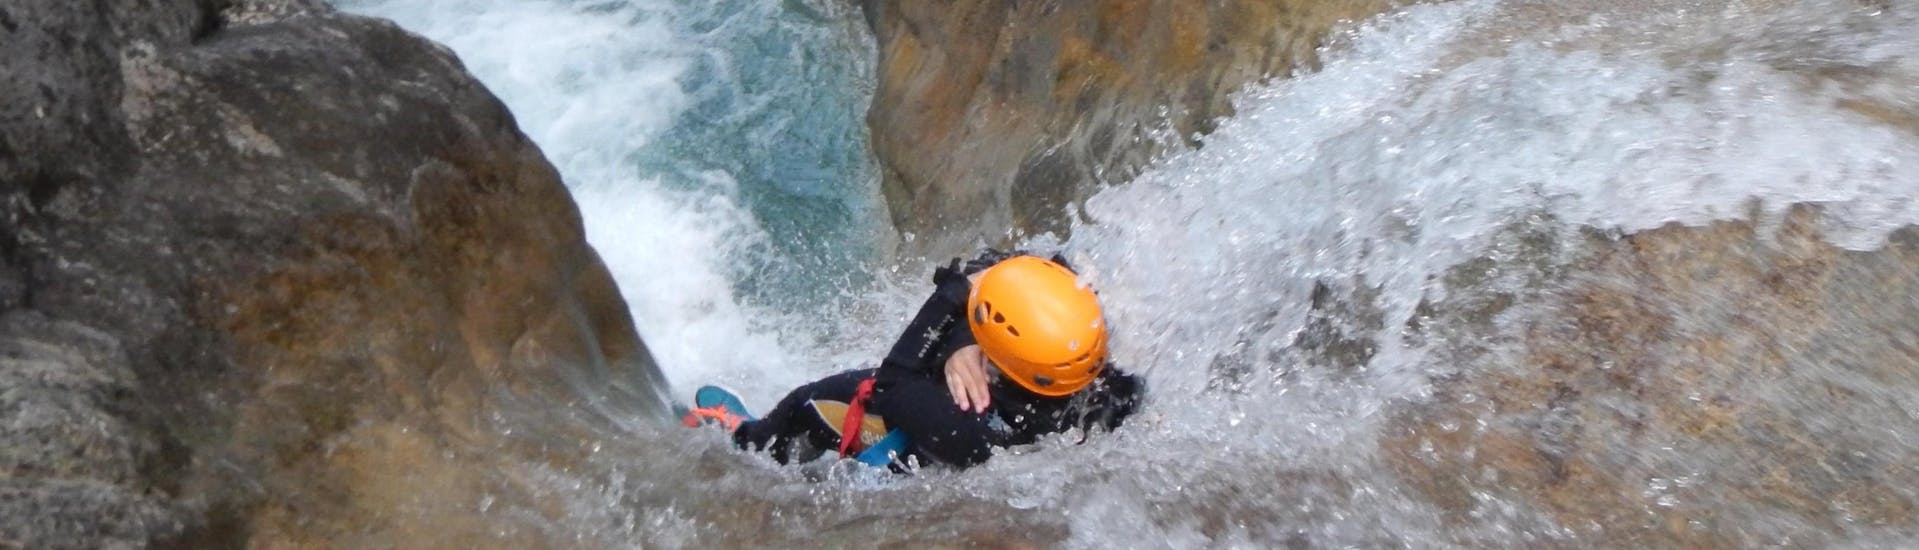 A person sliding down a waterfall while action canyoning near Lake Weissensee in Carinthia with ARES Drautal Canyoning.